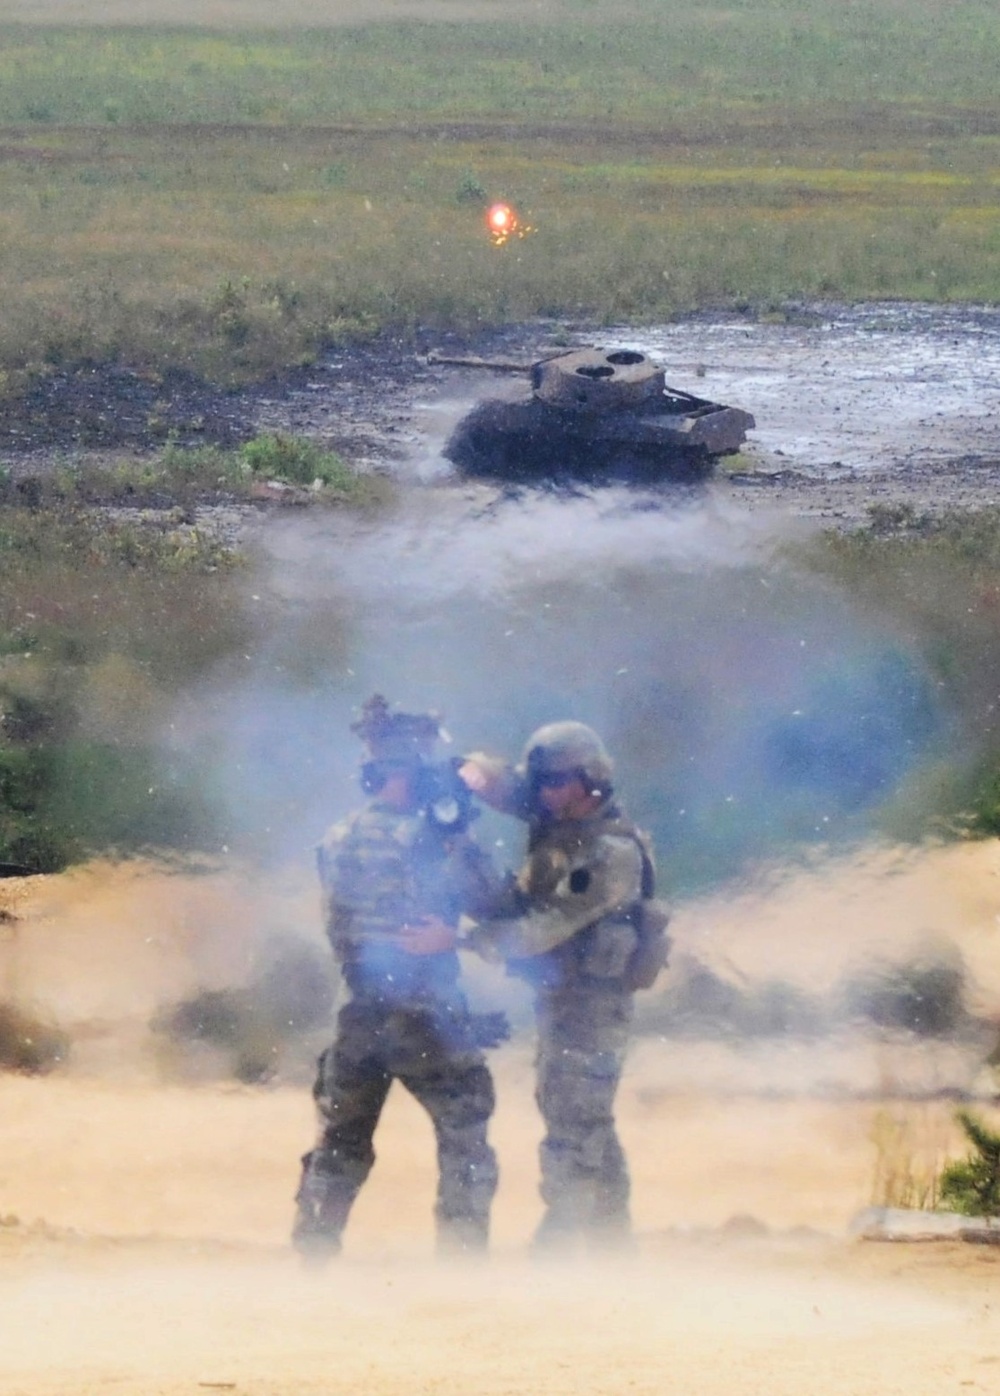 Fort Dix – 1 BN 175 INF Battalion Trains with the Carl Gustav Recoilless Rifle